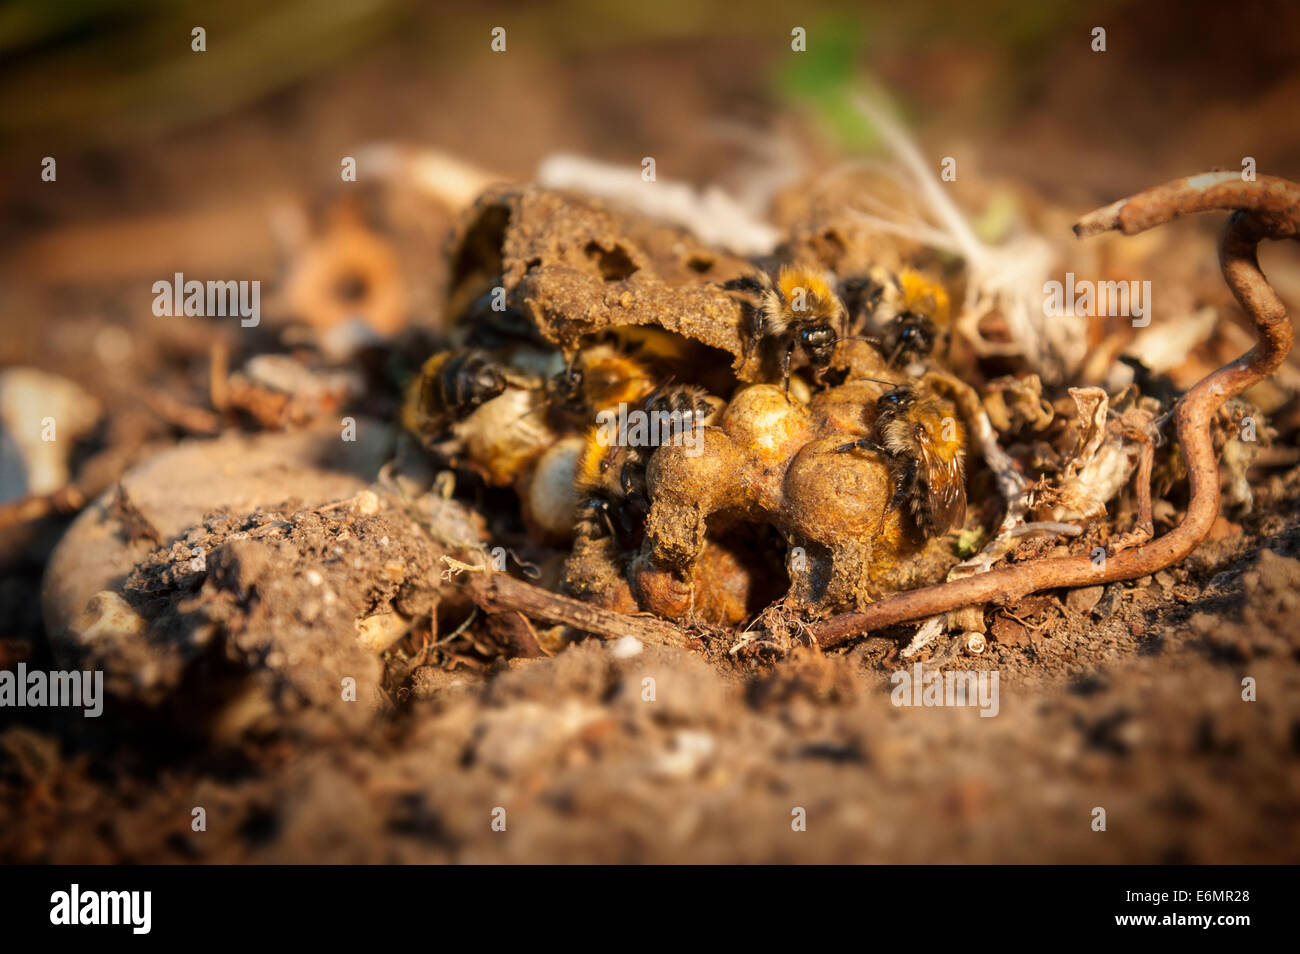 British Carder Bumblebees nest ( Bombus Pascuorum ) in the soil of a garden in the UK Stock Photo